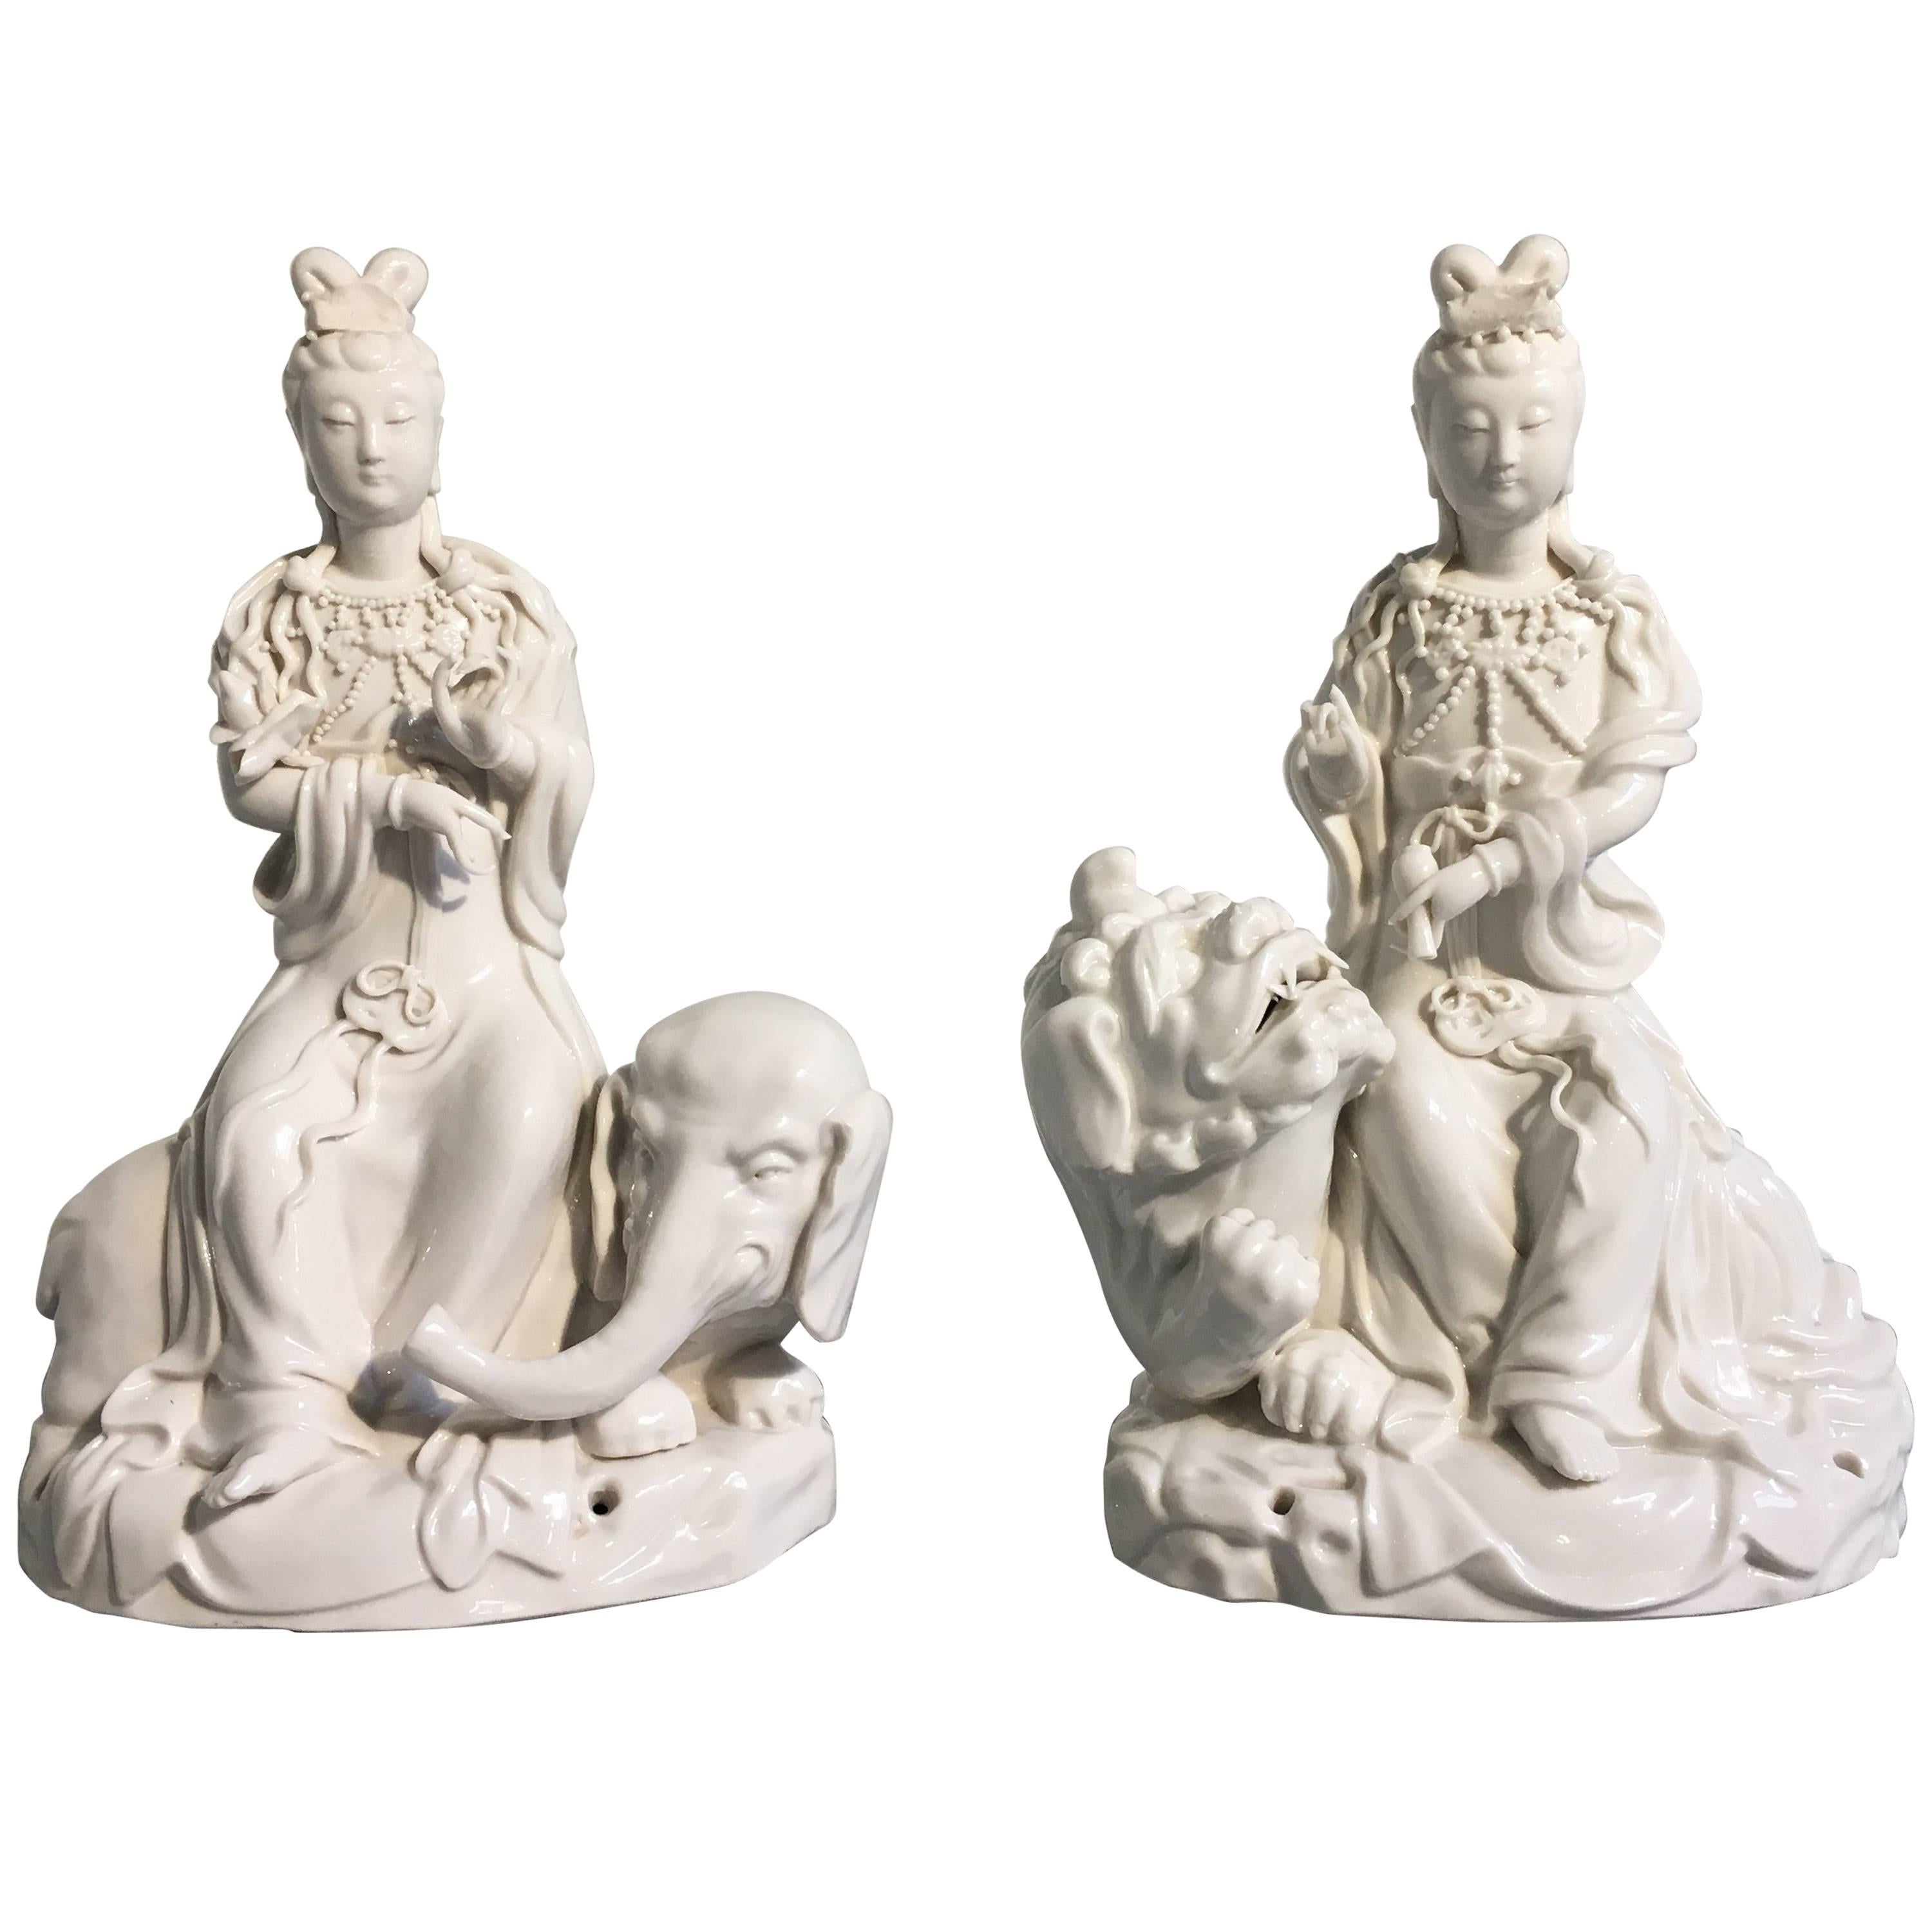 Pair of Vintage Blanc de Chine Figures of Guanyin Riding an Elephant and Lion For Sale